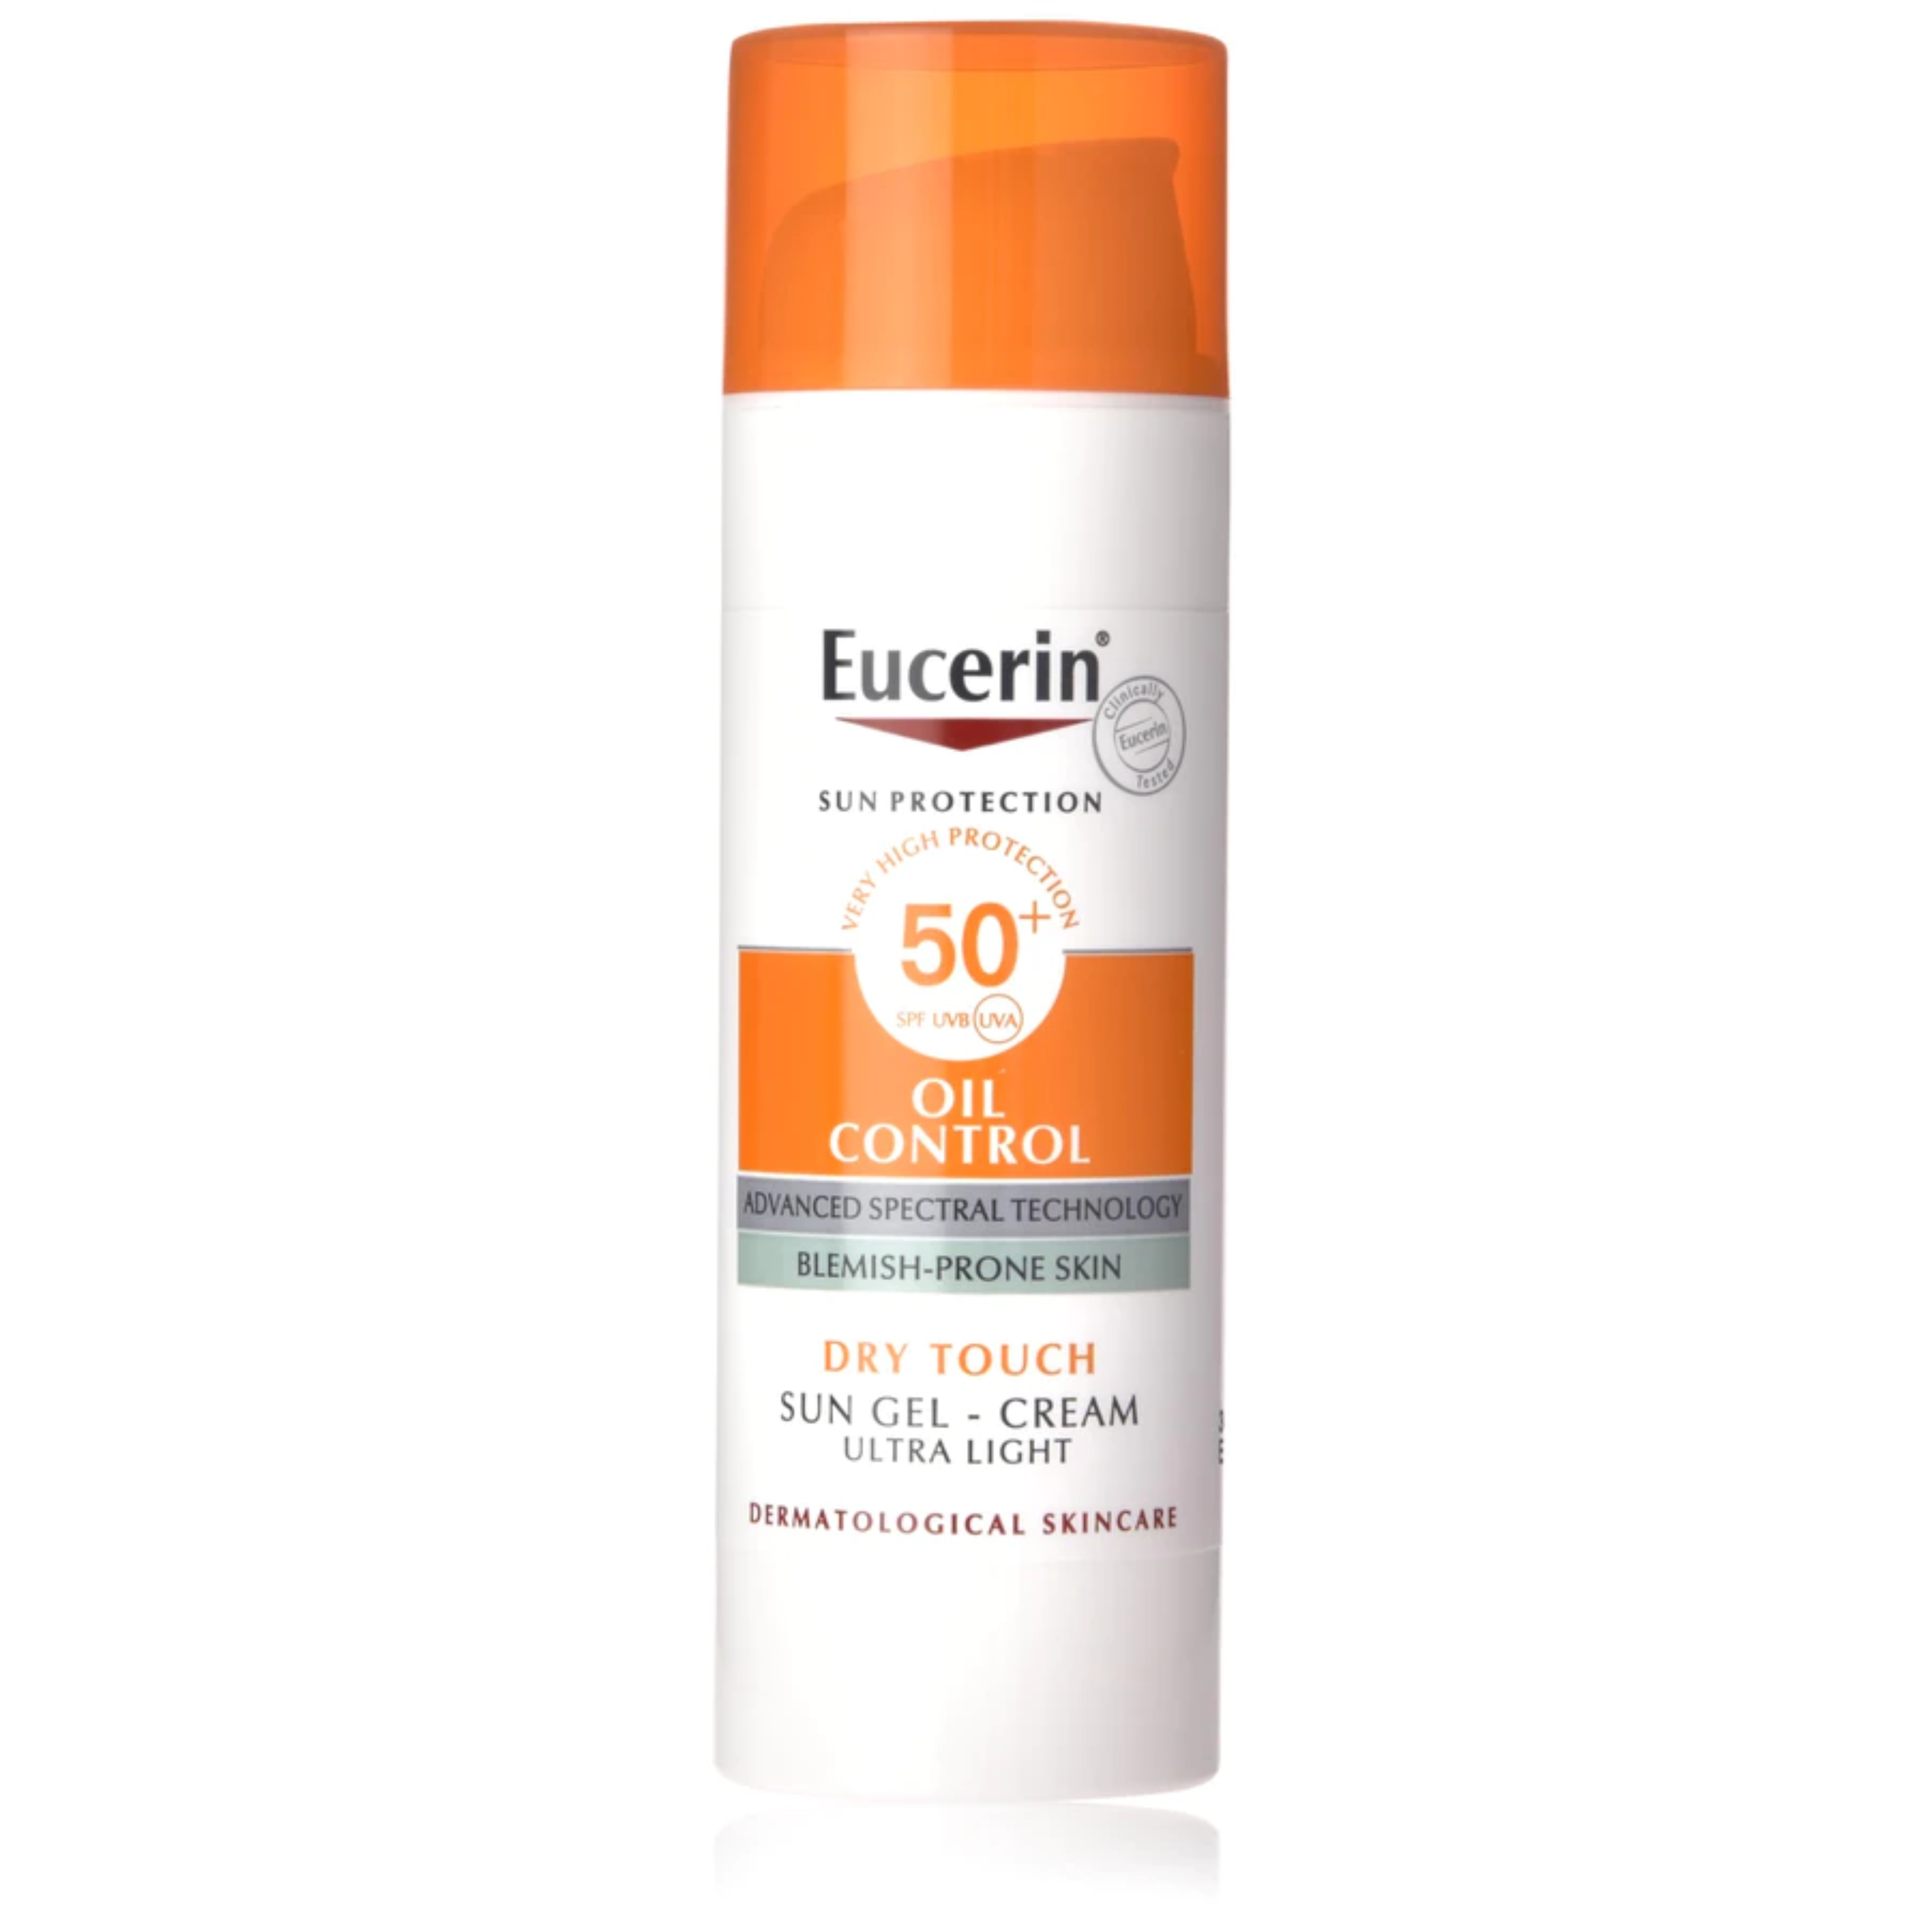 Eucerin Face Sunscreen Oil Control Gel-Cream Dry Touch, High UVA/UVB Protection, SPF 50+, Light Texture Sun Protection, Suitable Under Make-Up